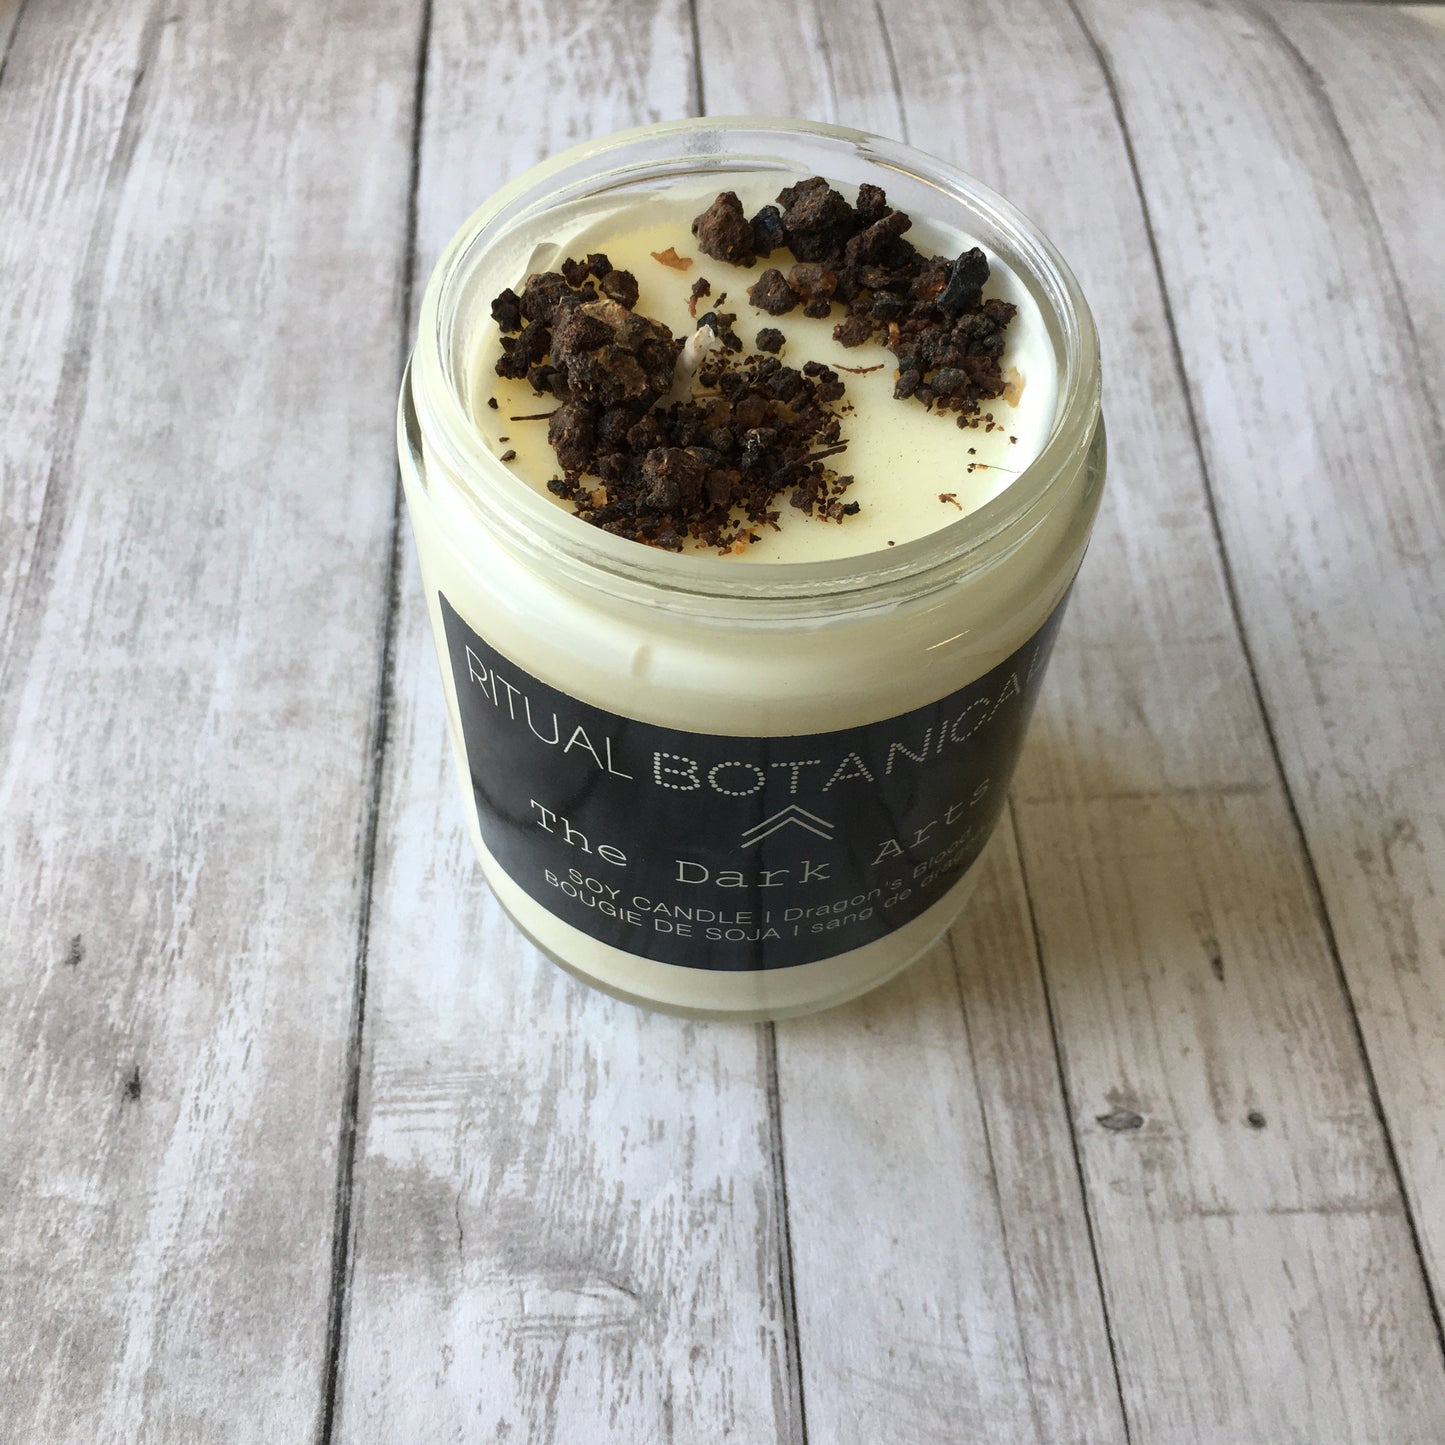 The Dark Arts Opium & Spice Soy Candle